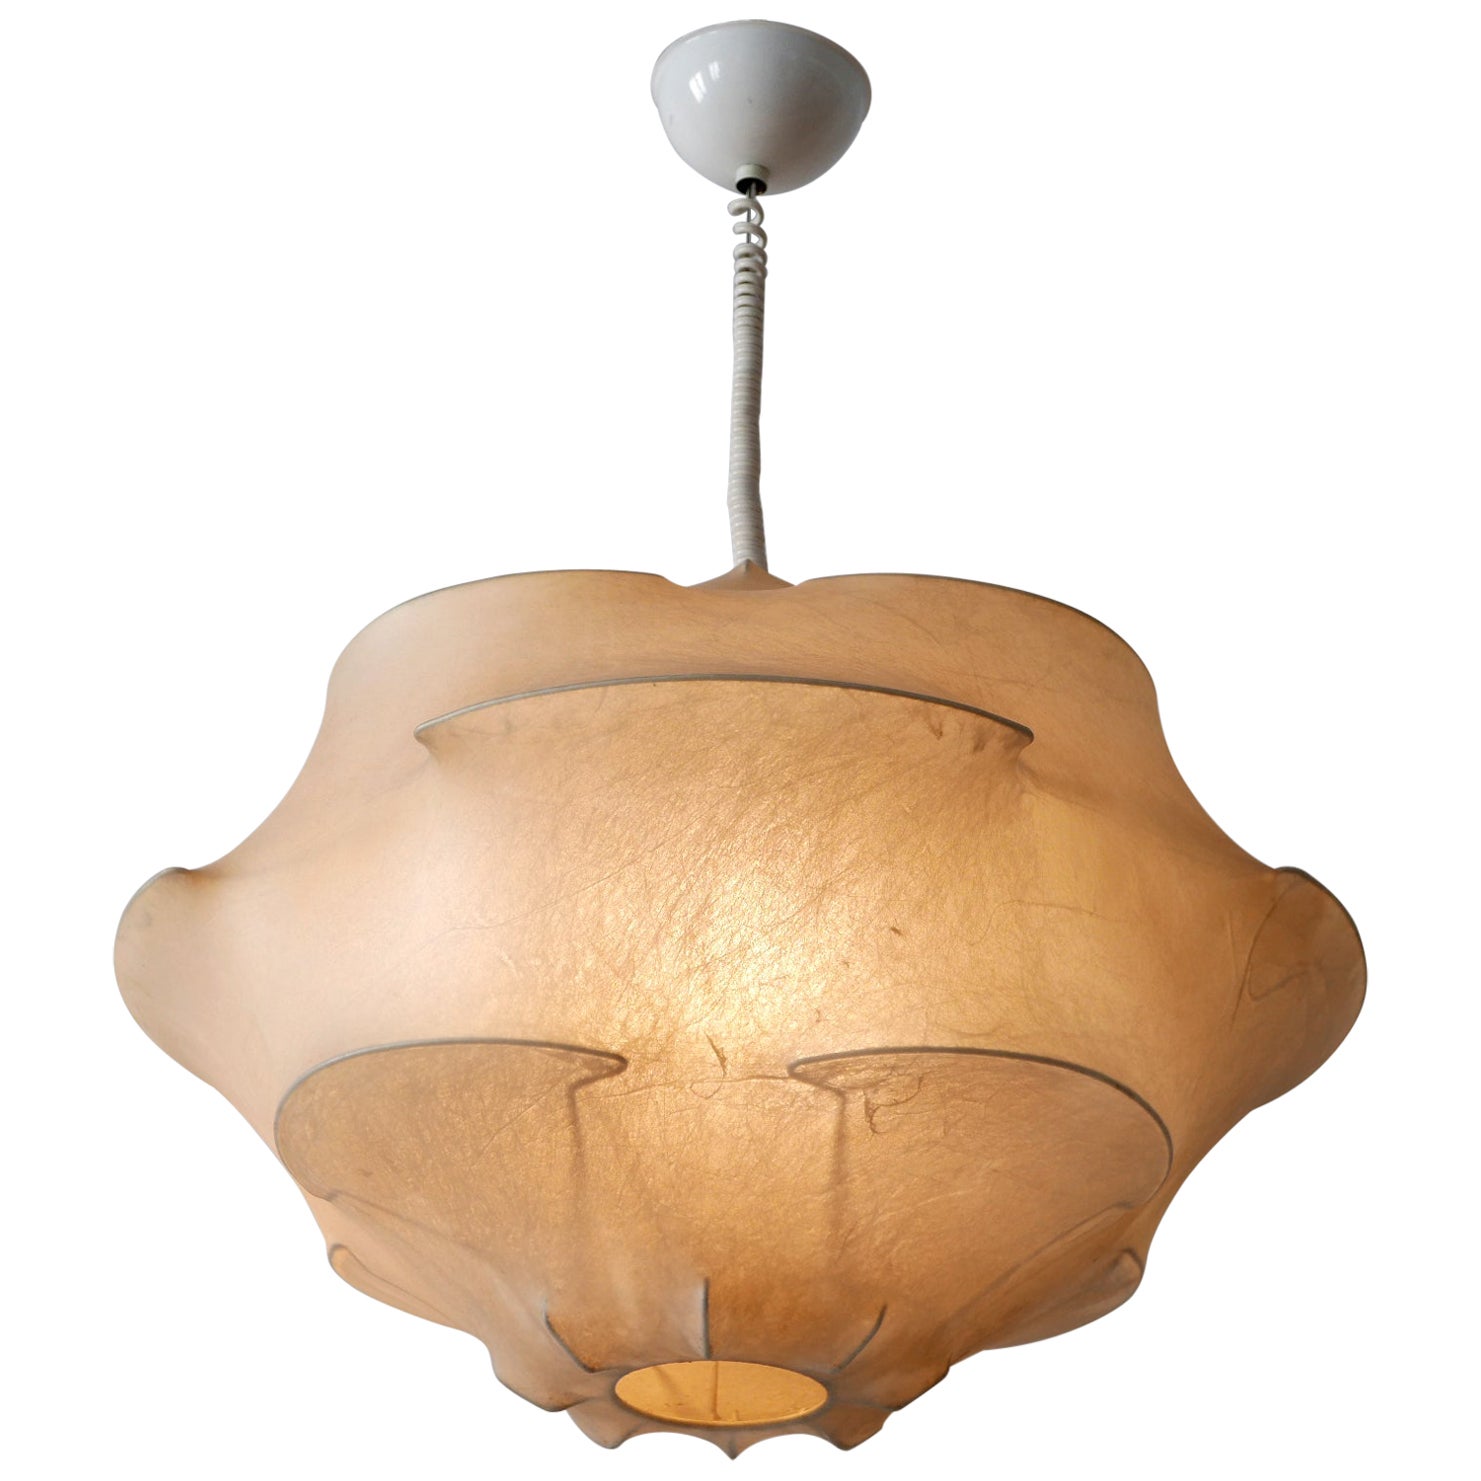 XL Mid-Century Modern Cocoon Pendant Lamp or Hanging Light by Flos Italy, 1960s